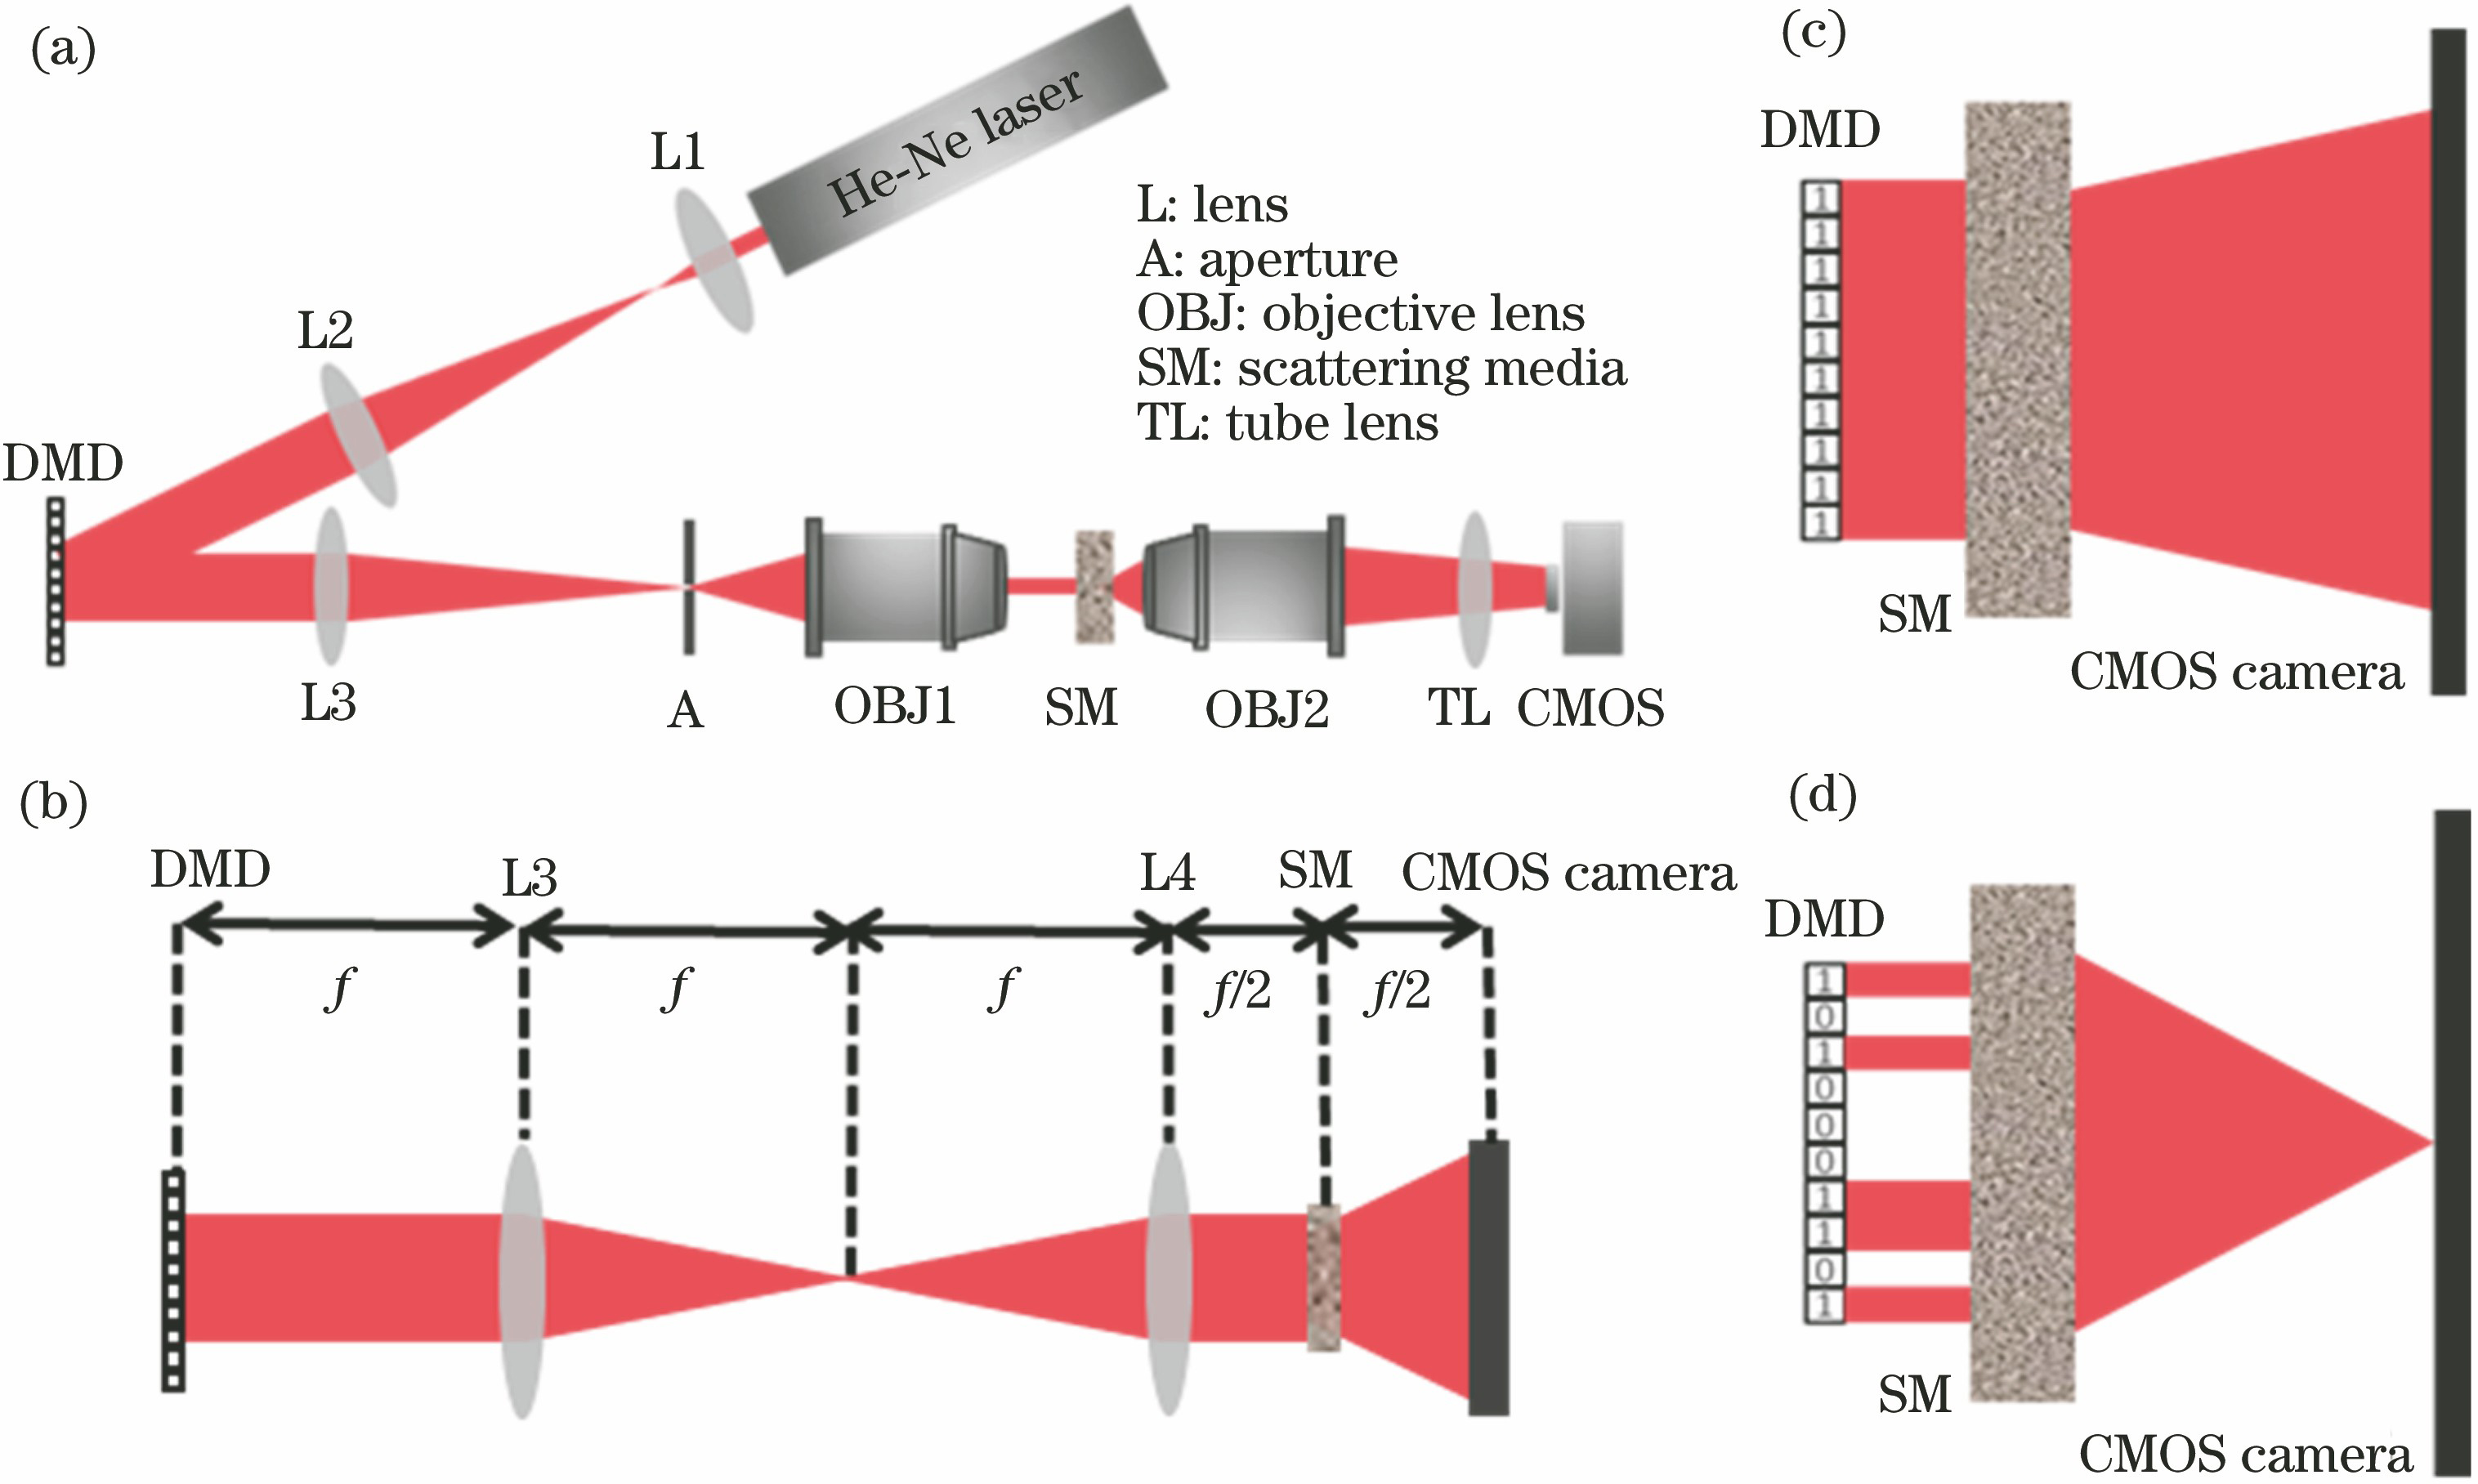 Schematic of simulation system and focusing. (a) Schematic of simulation system; (b) schematic of simulation parameters; (c) scattering through scattering medium without DMD modulation; (d) focusing through scattering medium with DMD modulation